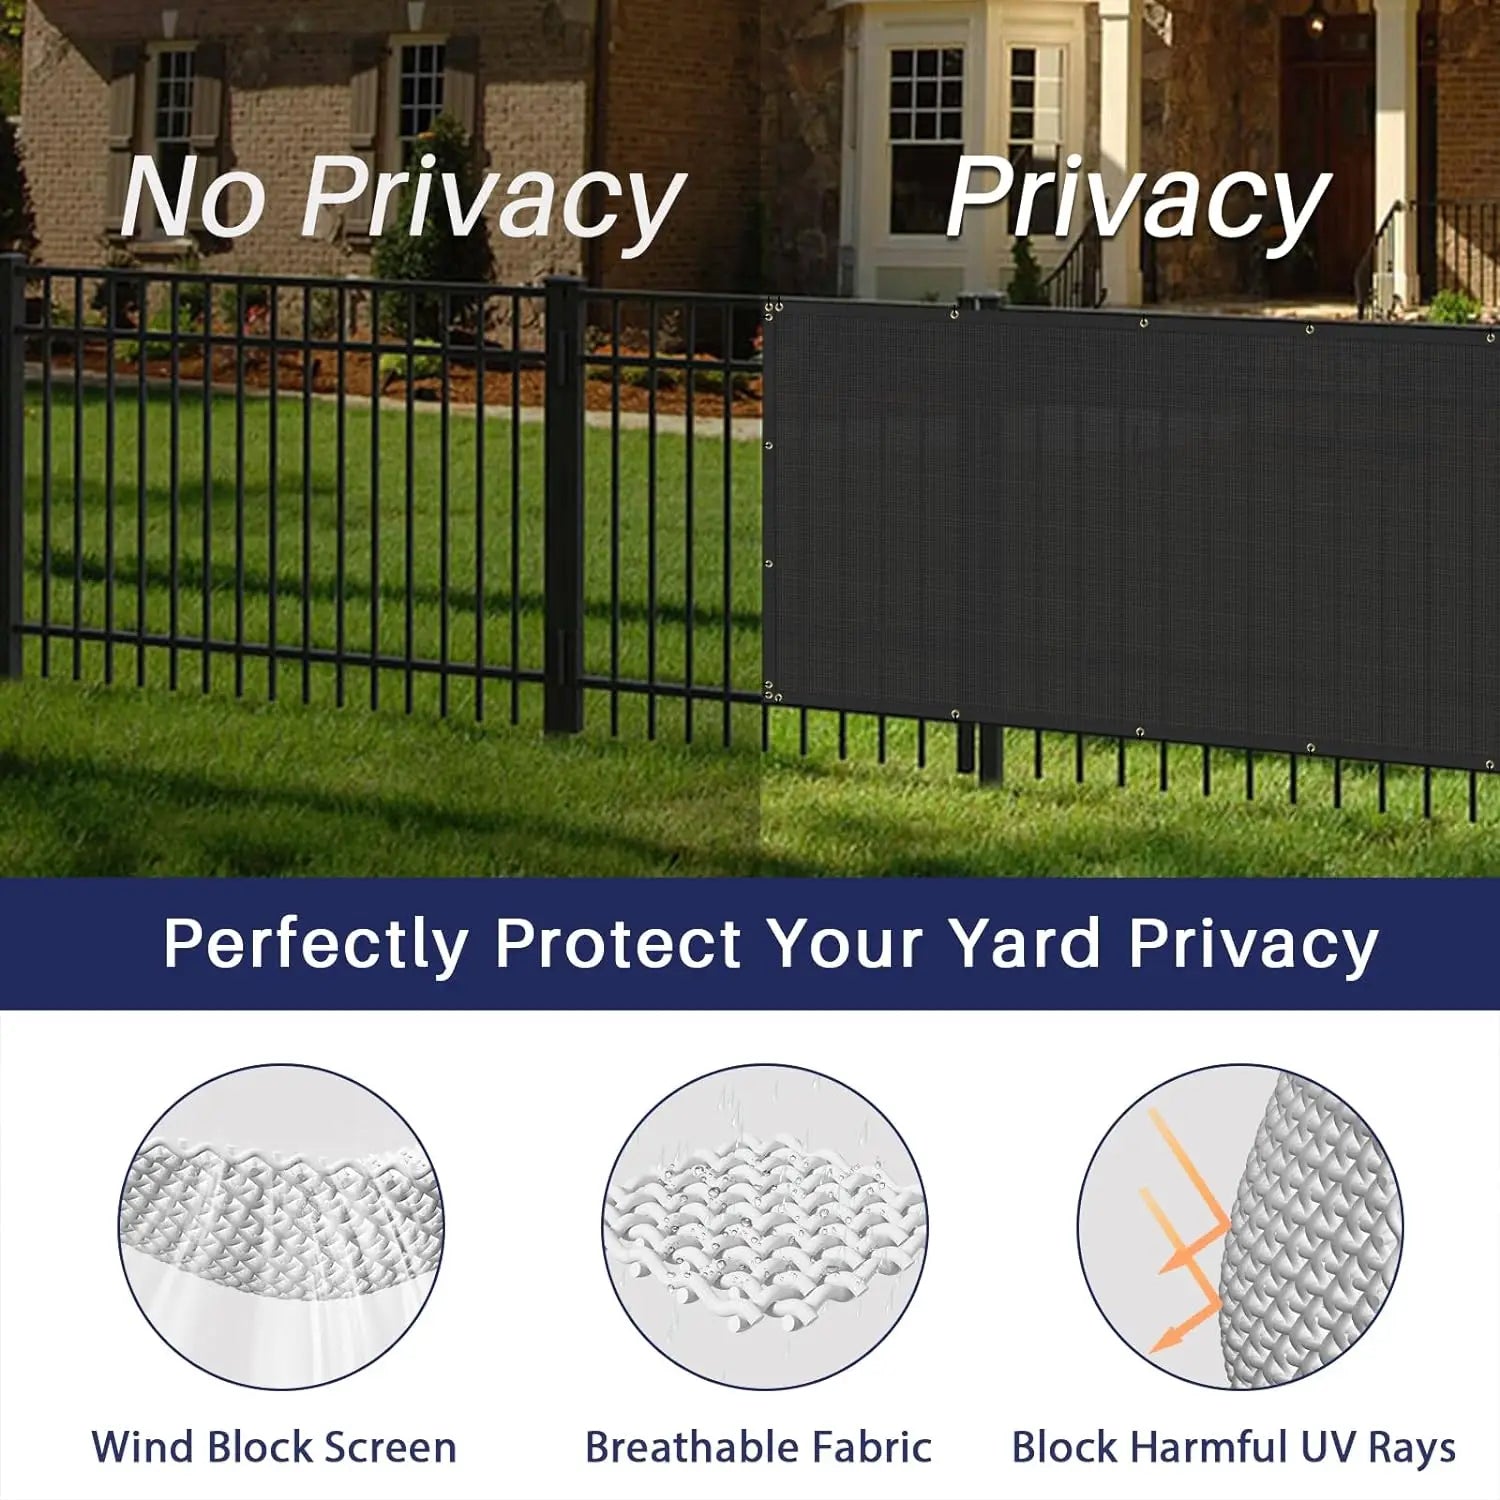 6' X 22' Privacy Fence Screen in Black W/ Brass Grommet 85% Blockage Windscreen Outdoor Mesh Fencing Cover Netting 150GSM Fabric